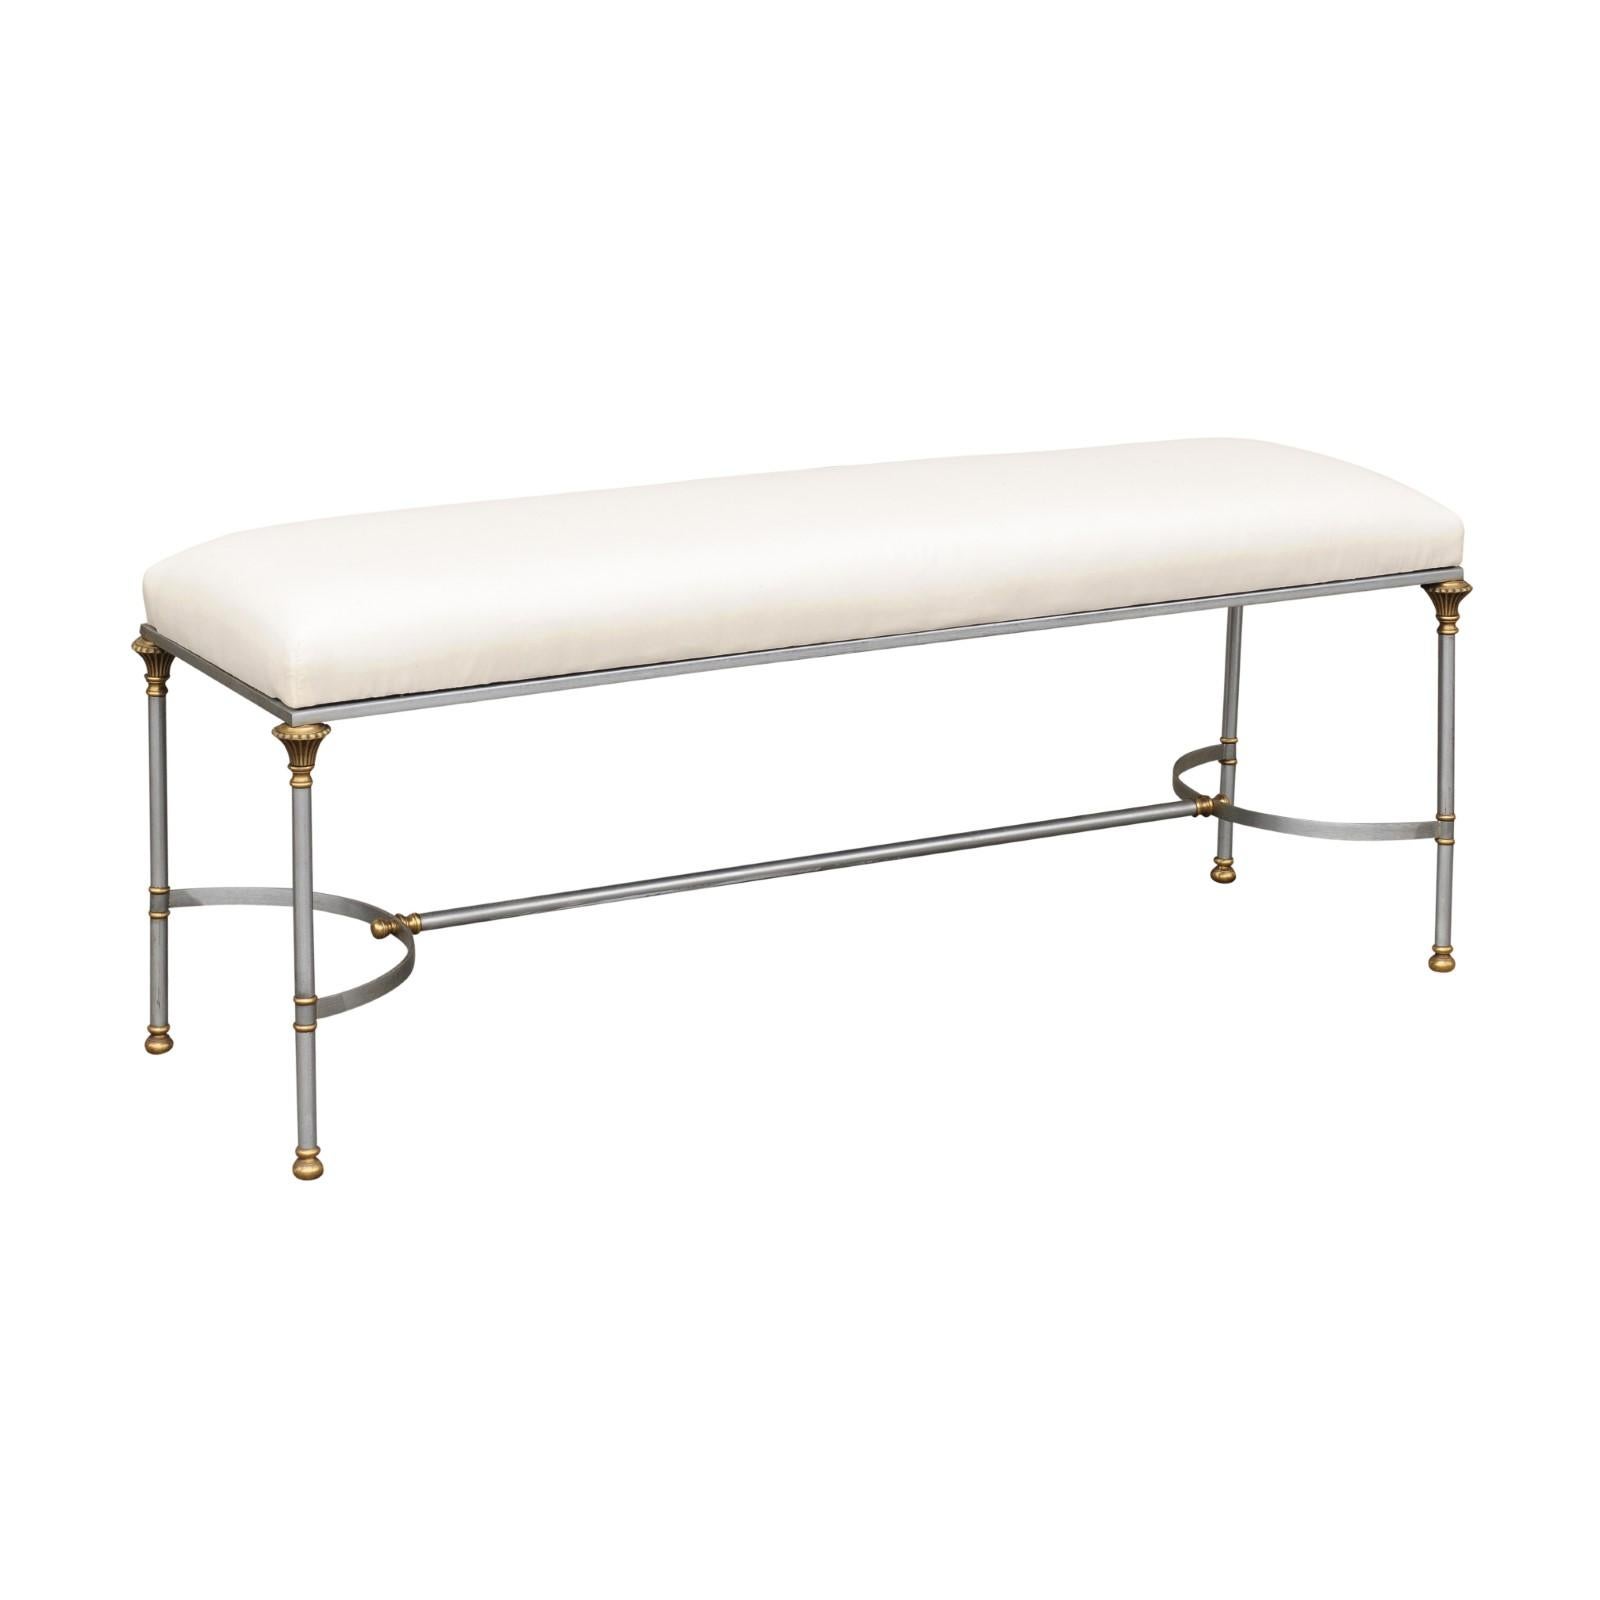 Italian 1950s Maison Jansen Style Steel and Brass Bench with Floriform Capitals